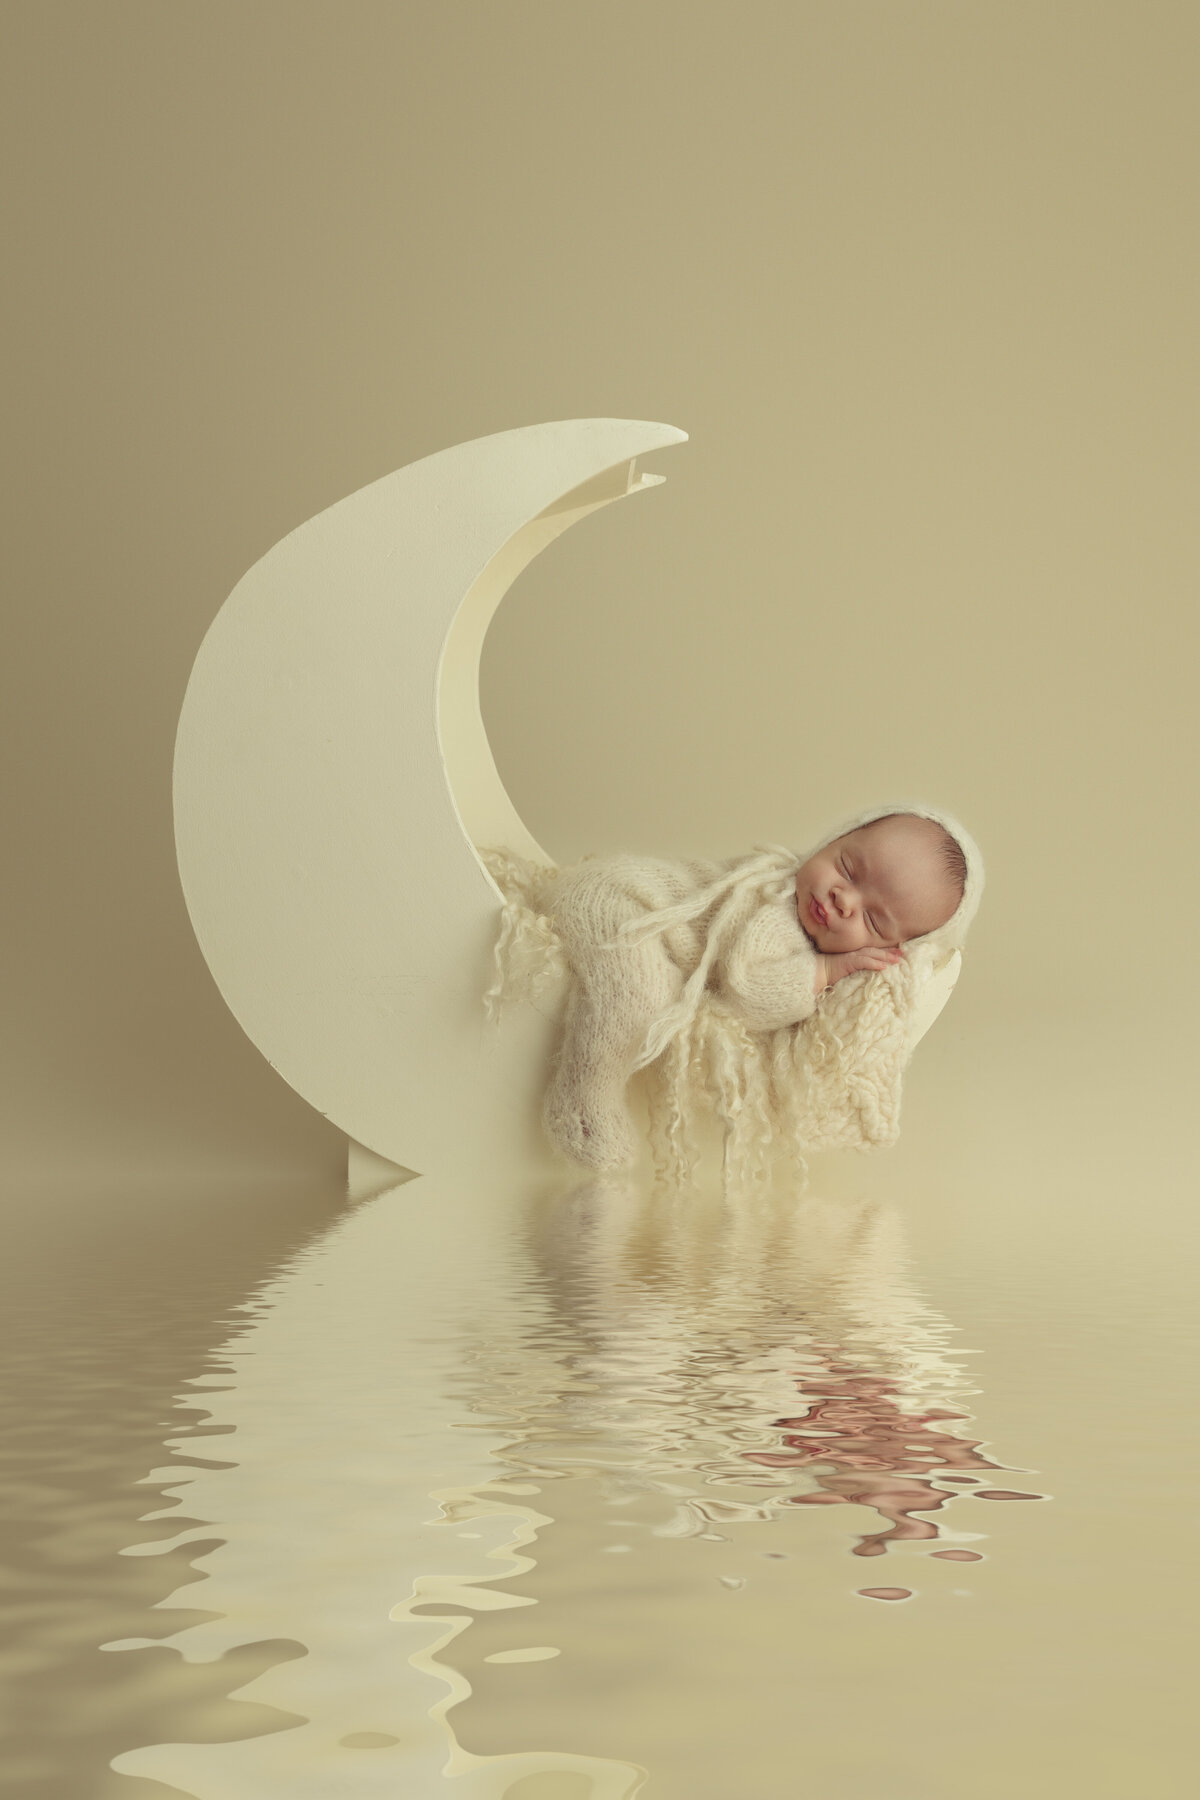 A newborn baby sleeps in froggy pose in a yellow onesie in a moon shaped bed over waterNJ Newborn Photography